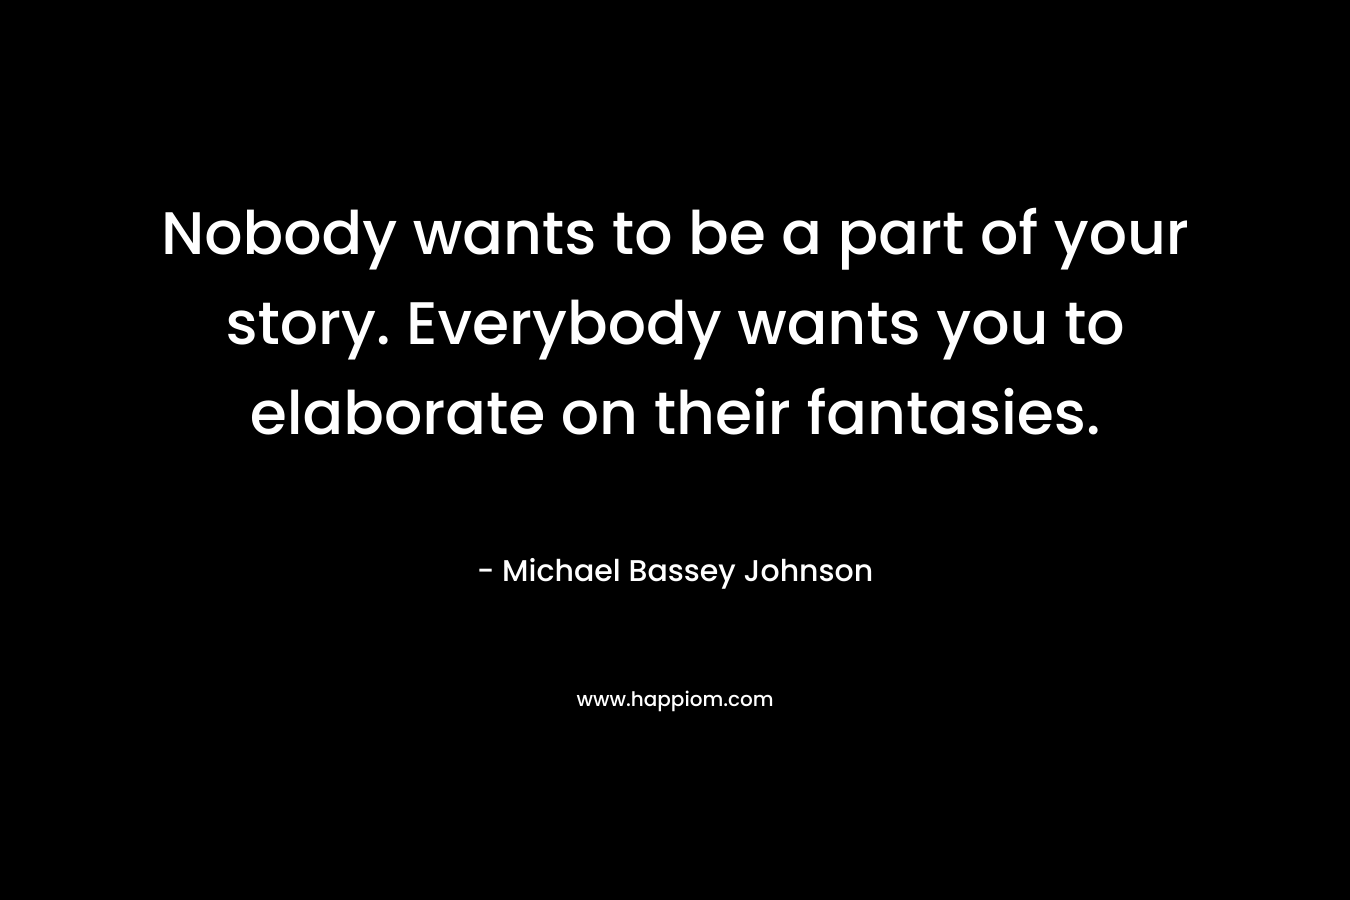 Nobody wants to be a part of your story. Everybody wants you to elaborate on their fantasies. – Michael Bassey Johnson